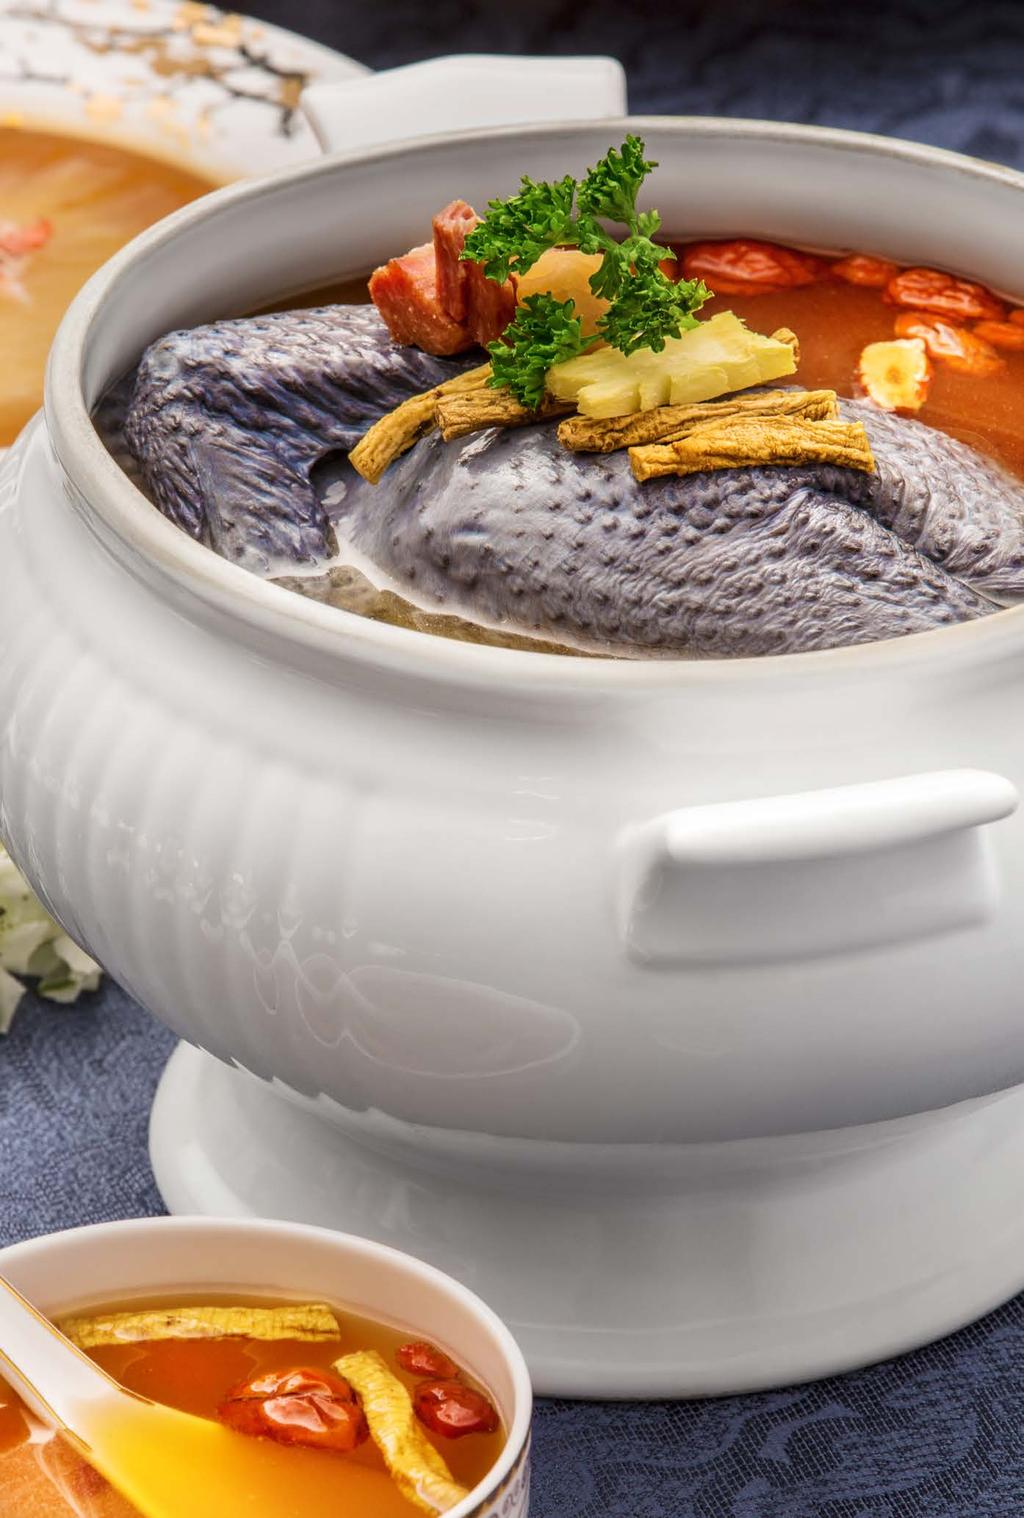 CHINESE YAM, WOLFBERRY WITH DANGSHEN AND BLACK-BONED CHICKEN FIN SOUP STEWED SOUP Premium Fin Soup Premium Fin Soup with Crab Meat Premium Fin Soup with Abalone and Ginseng [ $38/order ] [ $28/order